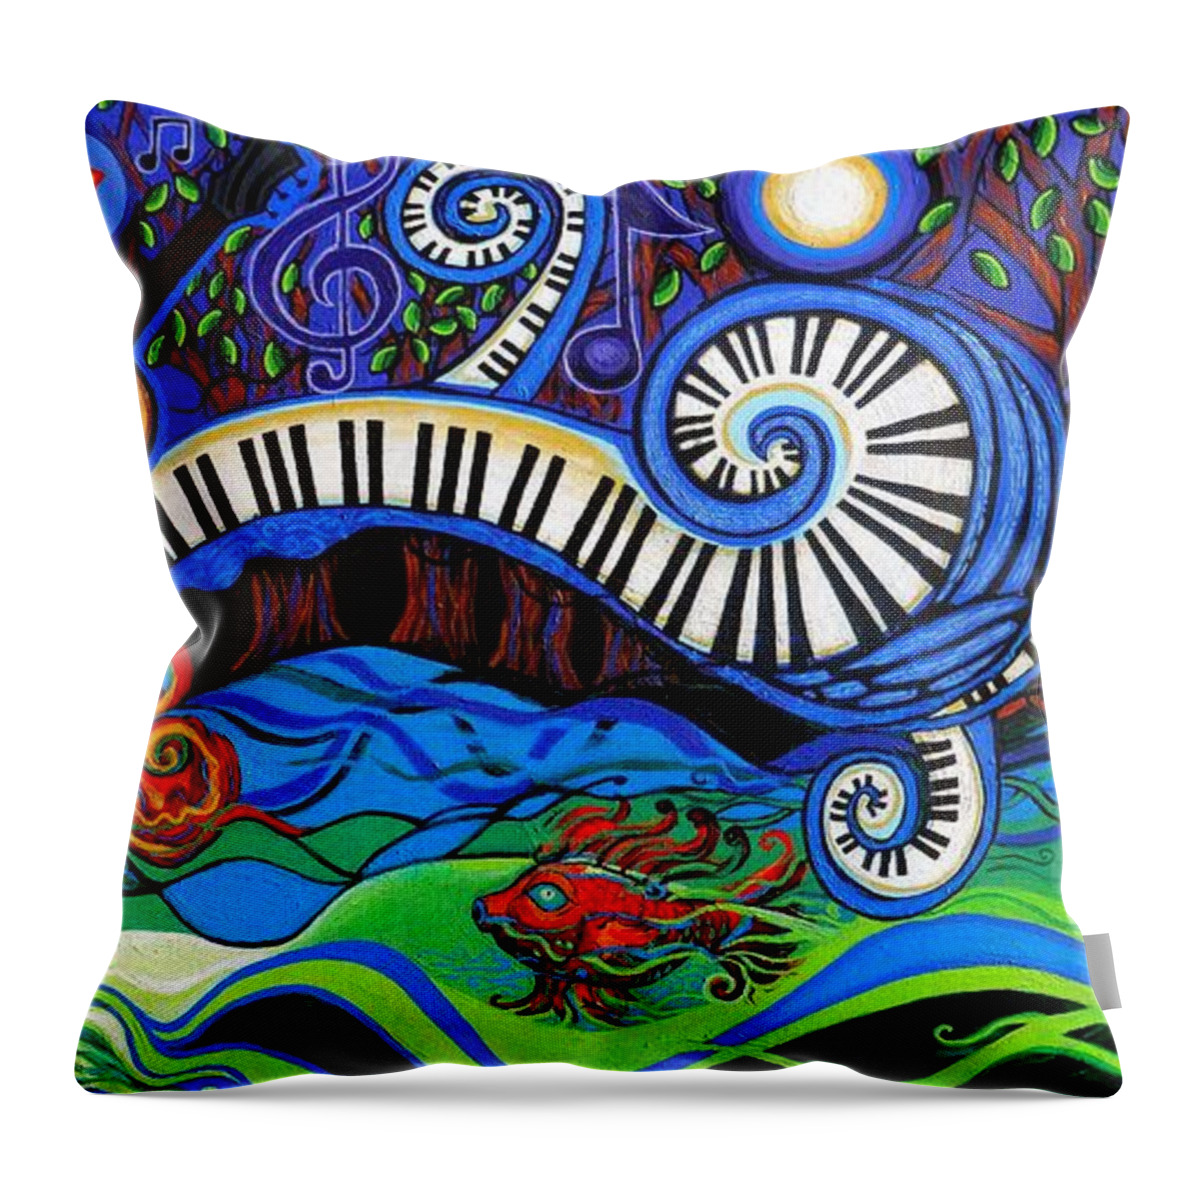 Music Throw Pillow featuring the painting The Power Of Music by Genevieve Esson